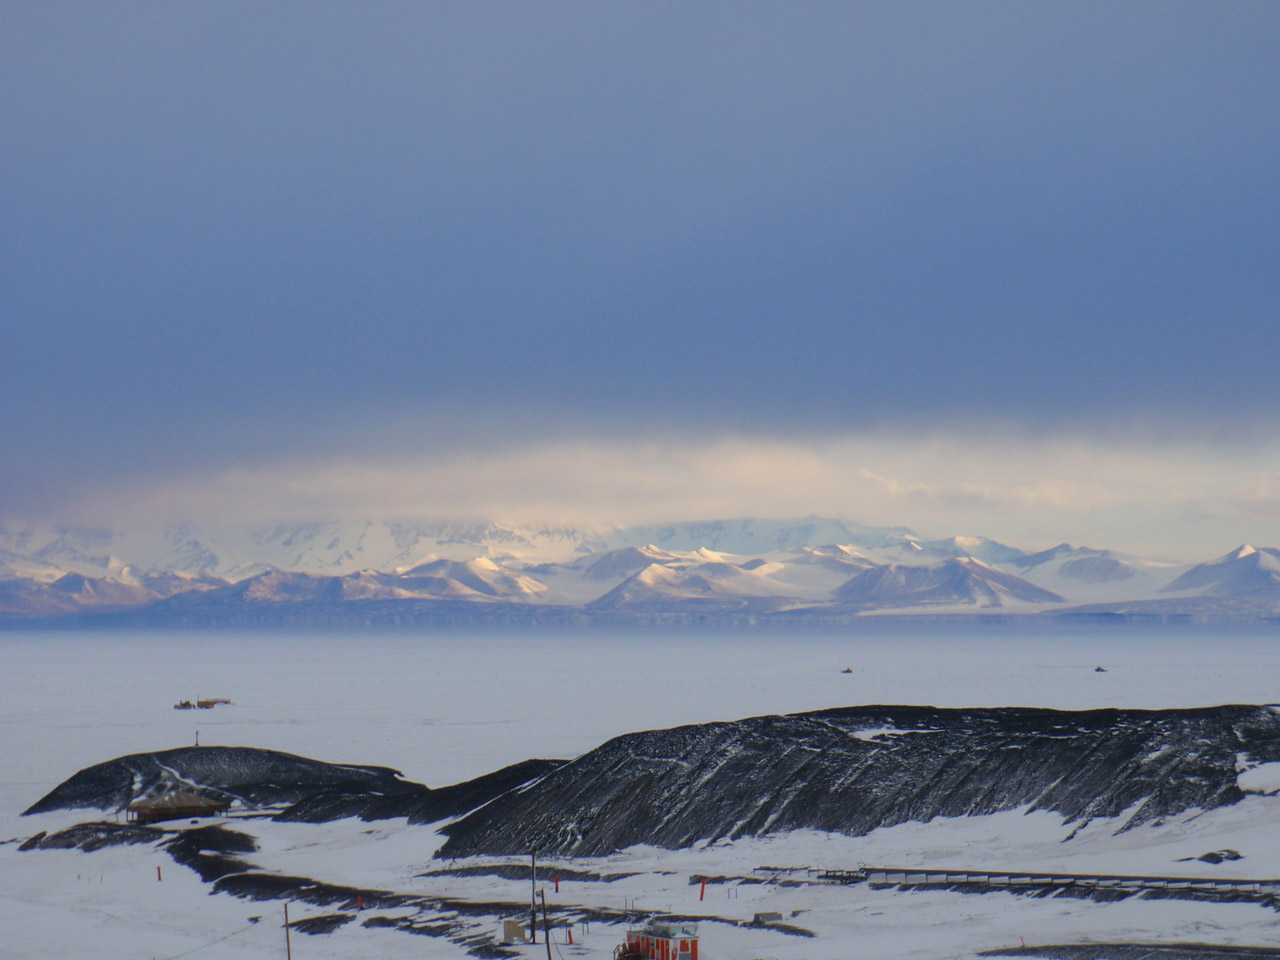 The Royal Society Range seen across the sea ice from McMurdo Station.  A Fata Morgana mirage makes it look like there are steep cliffs at the base of the mountains.